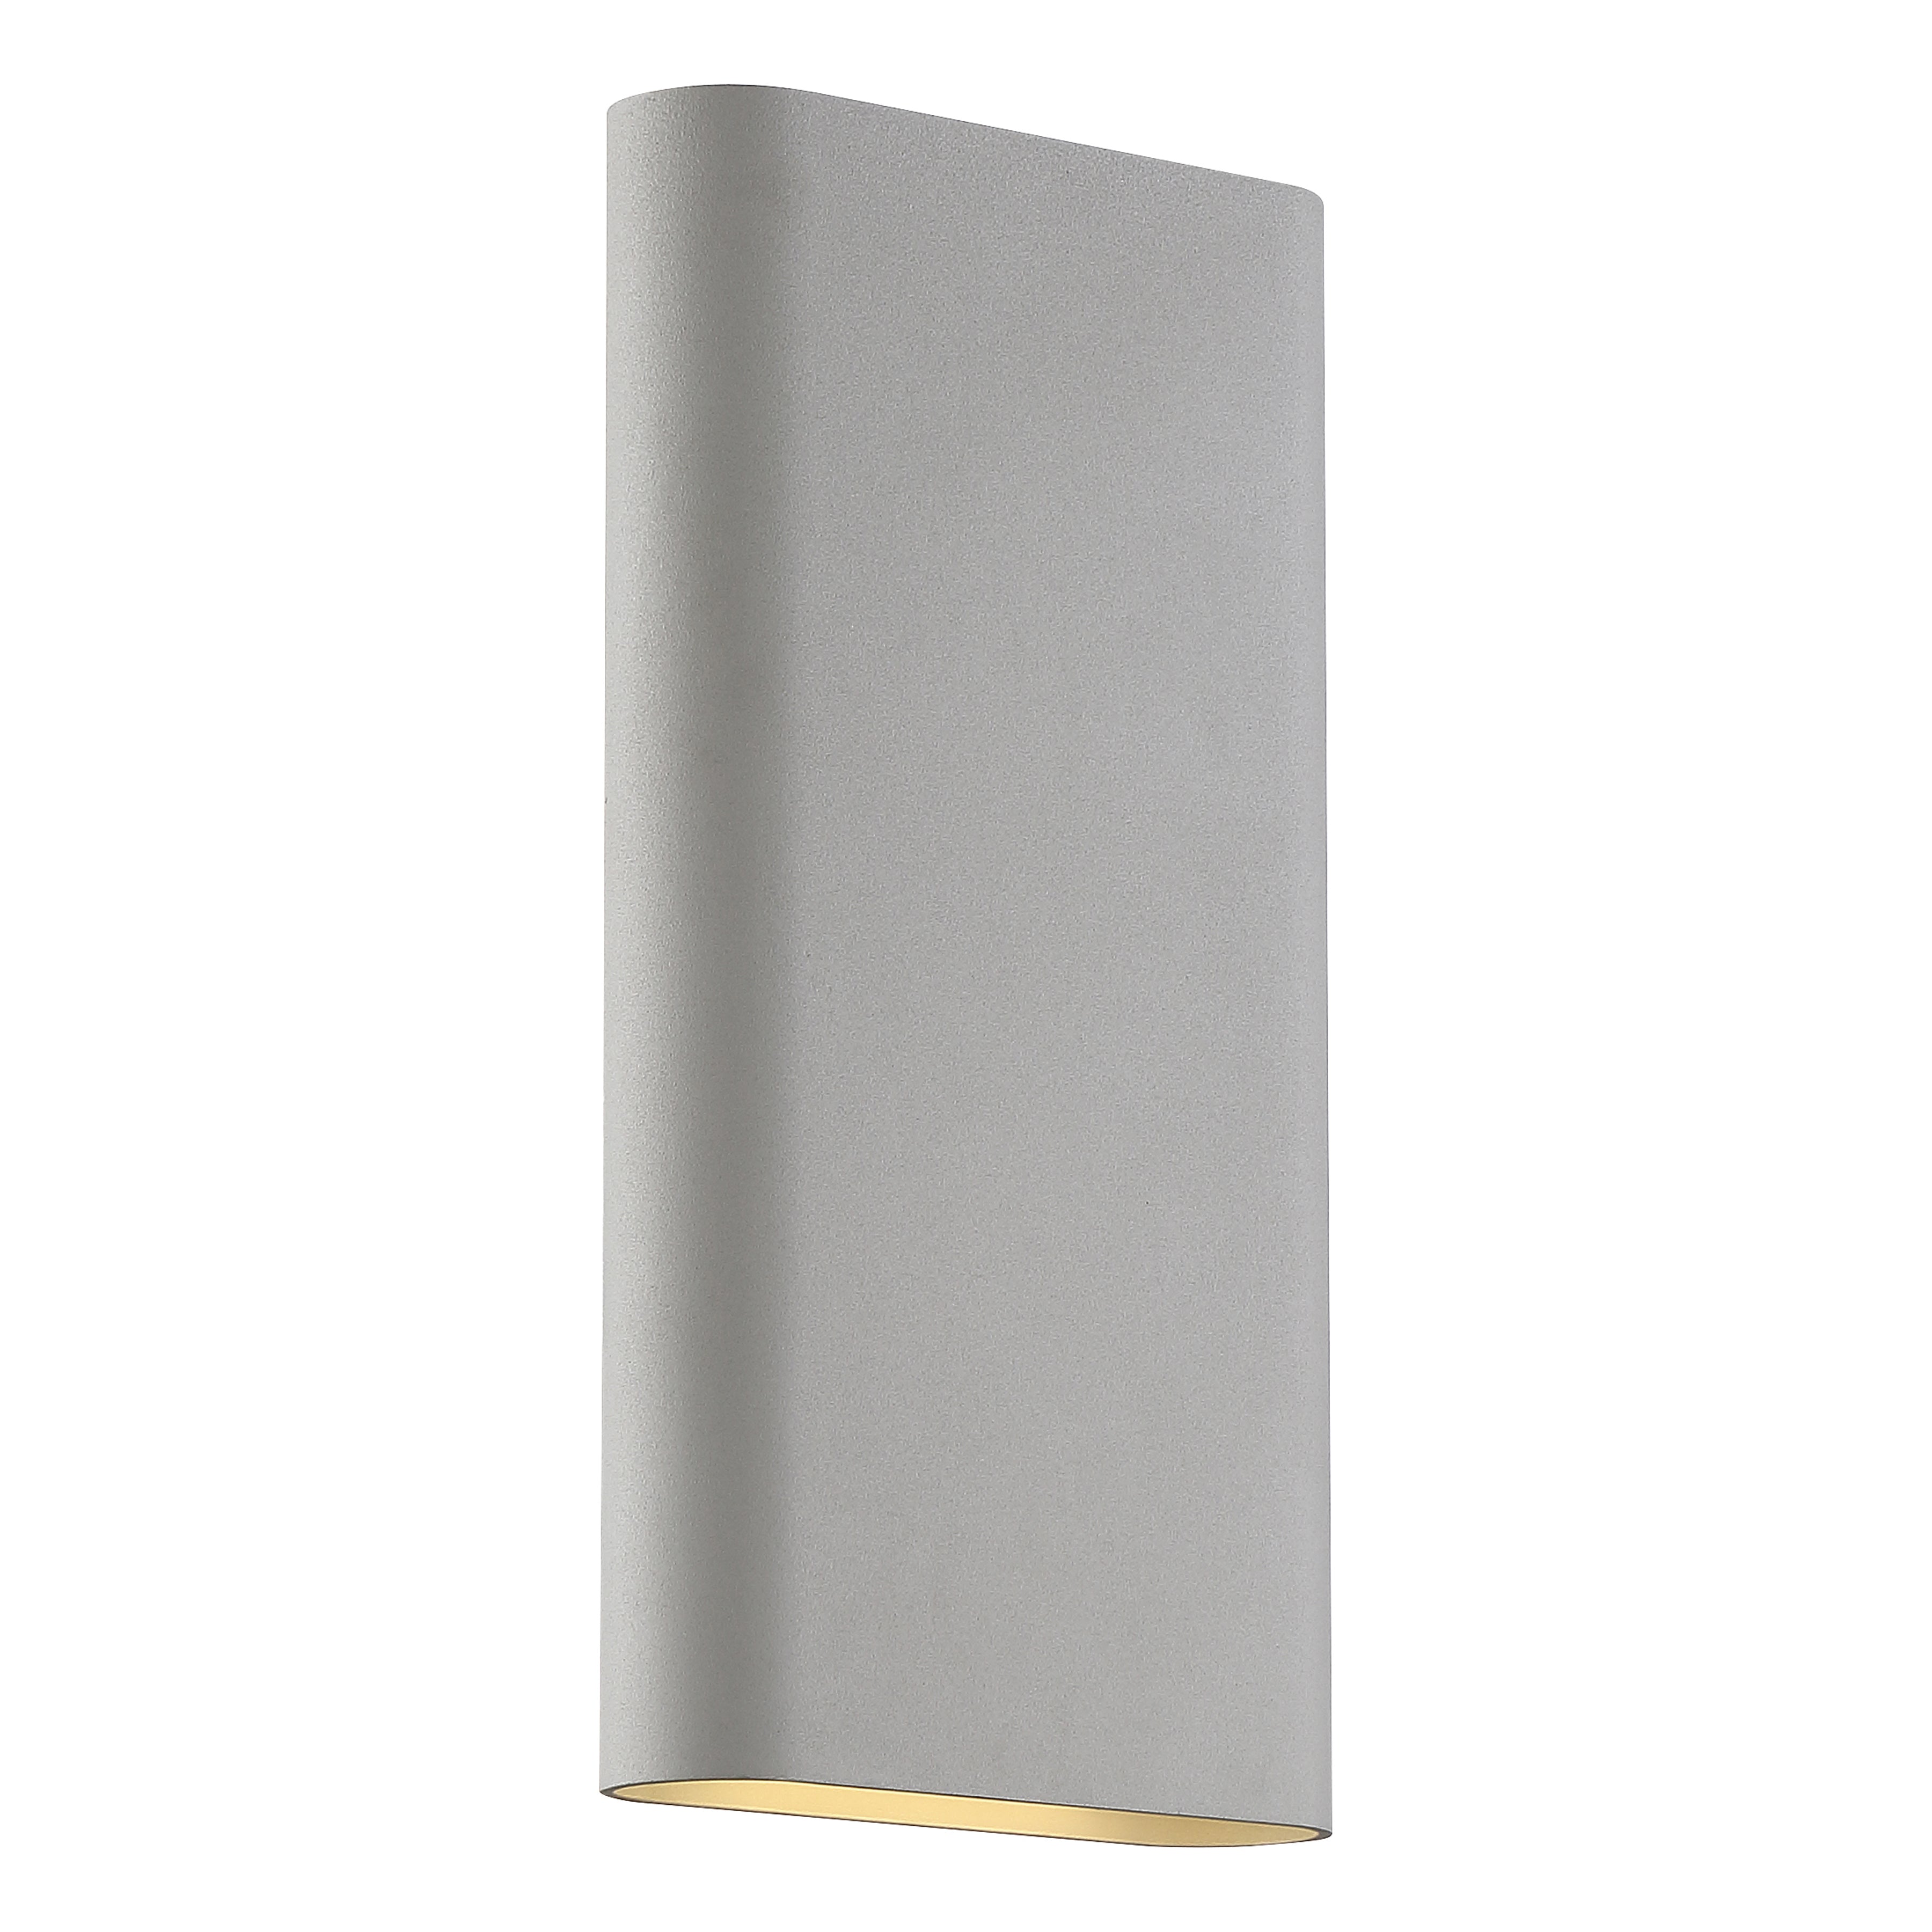 Access Lighting Lux Dual VoltageLED Wall Sconce